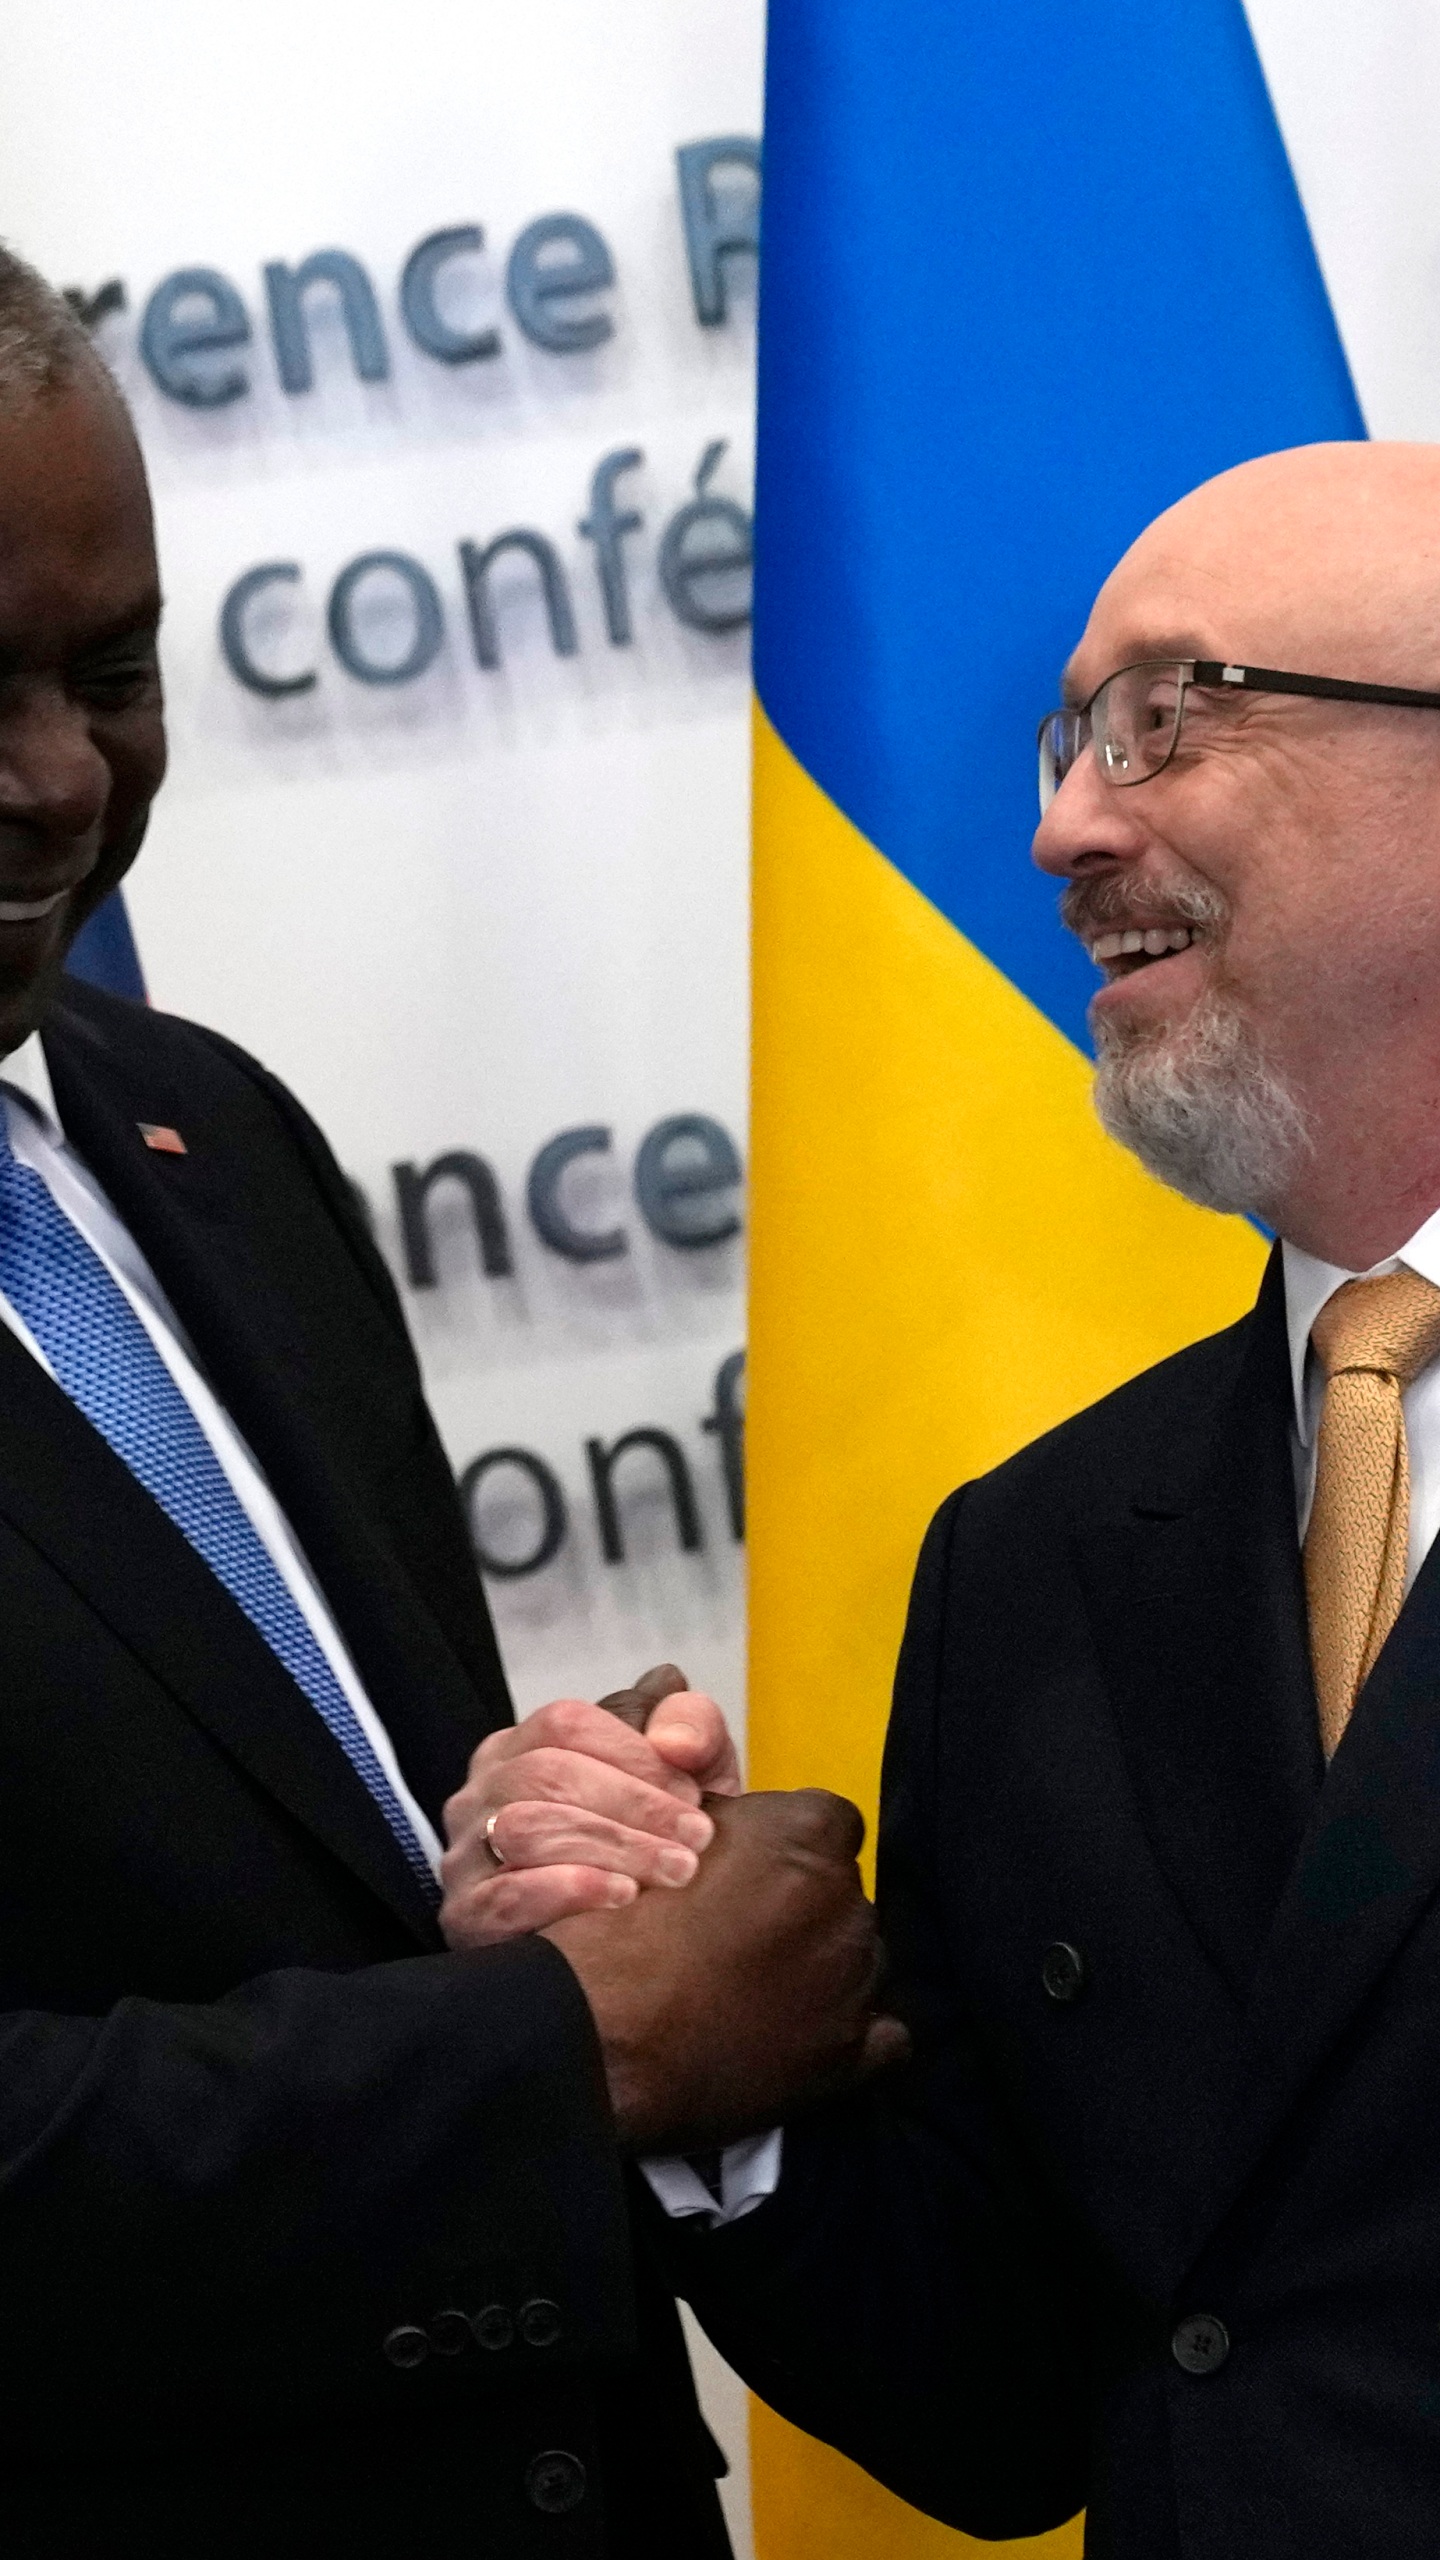 United States Secretary of Defense Lloyd Austin, left, greets Ukraine's Defense Minister Oleksiy Reznikov during a meeting on the sidelines of a NATO defense ministers meeting at NATO headquarters in Brussels, Thursday, June 15, 2023. NATO defense ministers are holding two days of meetings to discuss their support for Ukraine and ways to boost the defenses of eastern flank allies near Russia. A meeting of the Ukraine Contact Group will also be held to drum up more military aid for the war-torn country. (AP Photo/Virginia Mayo, Pool)